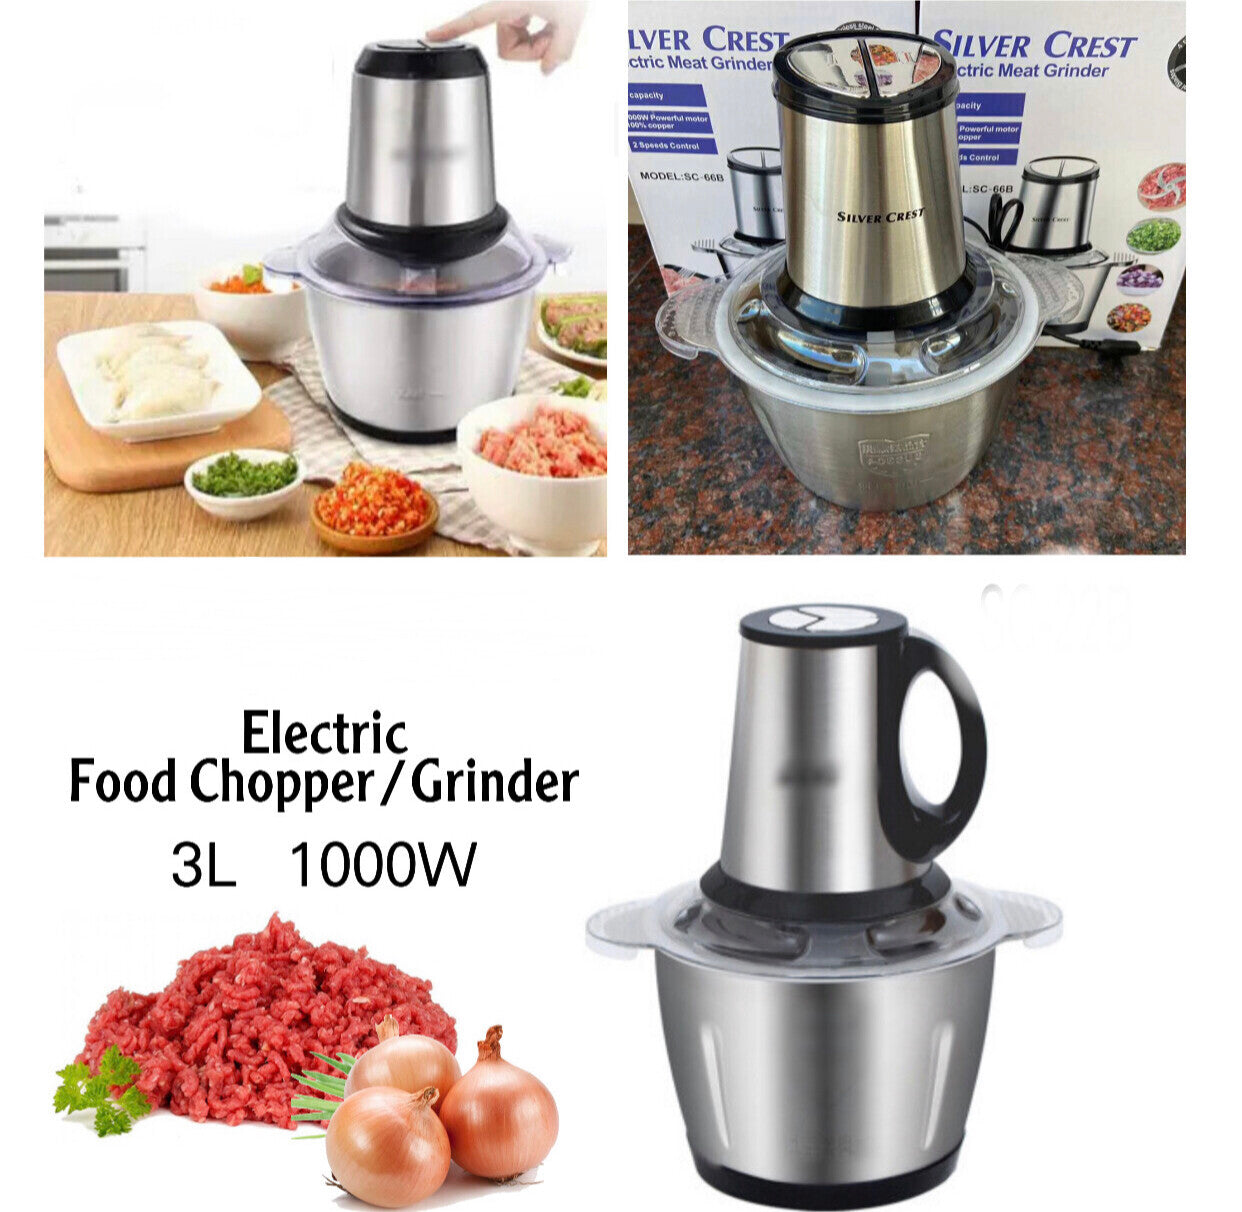 Silver Crest Electric Meat Grinder - Silver Electric Chopper 3 Liters Price in Pakistan